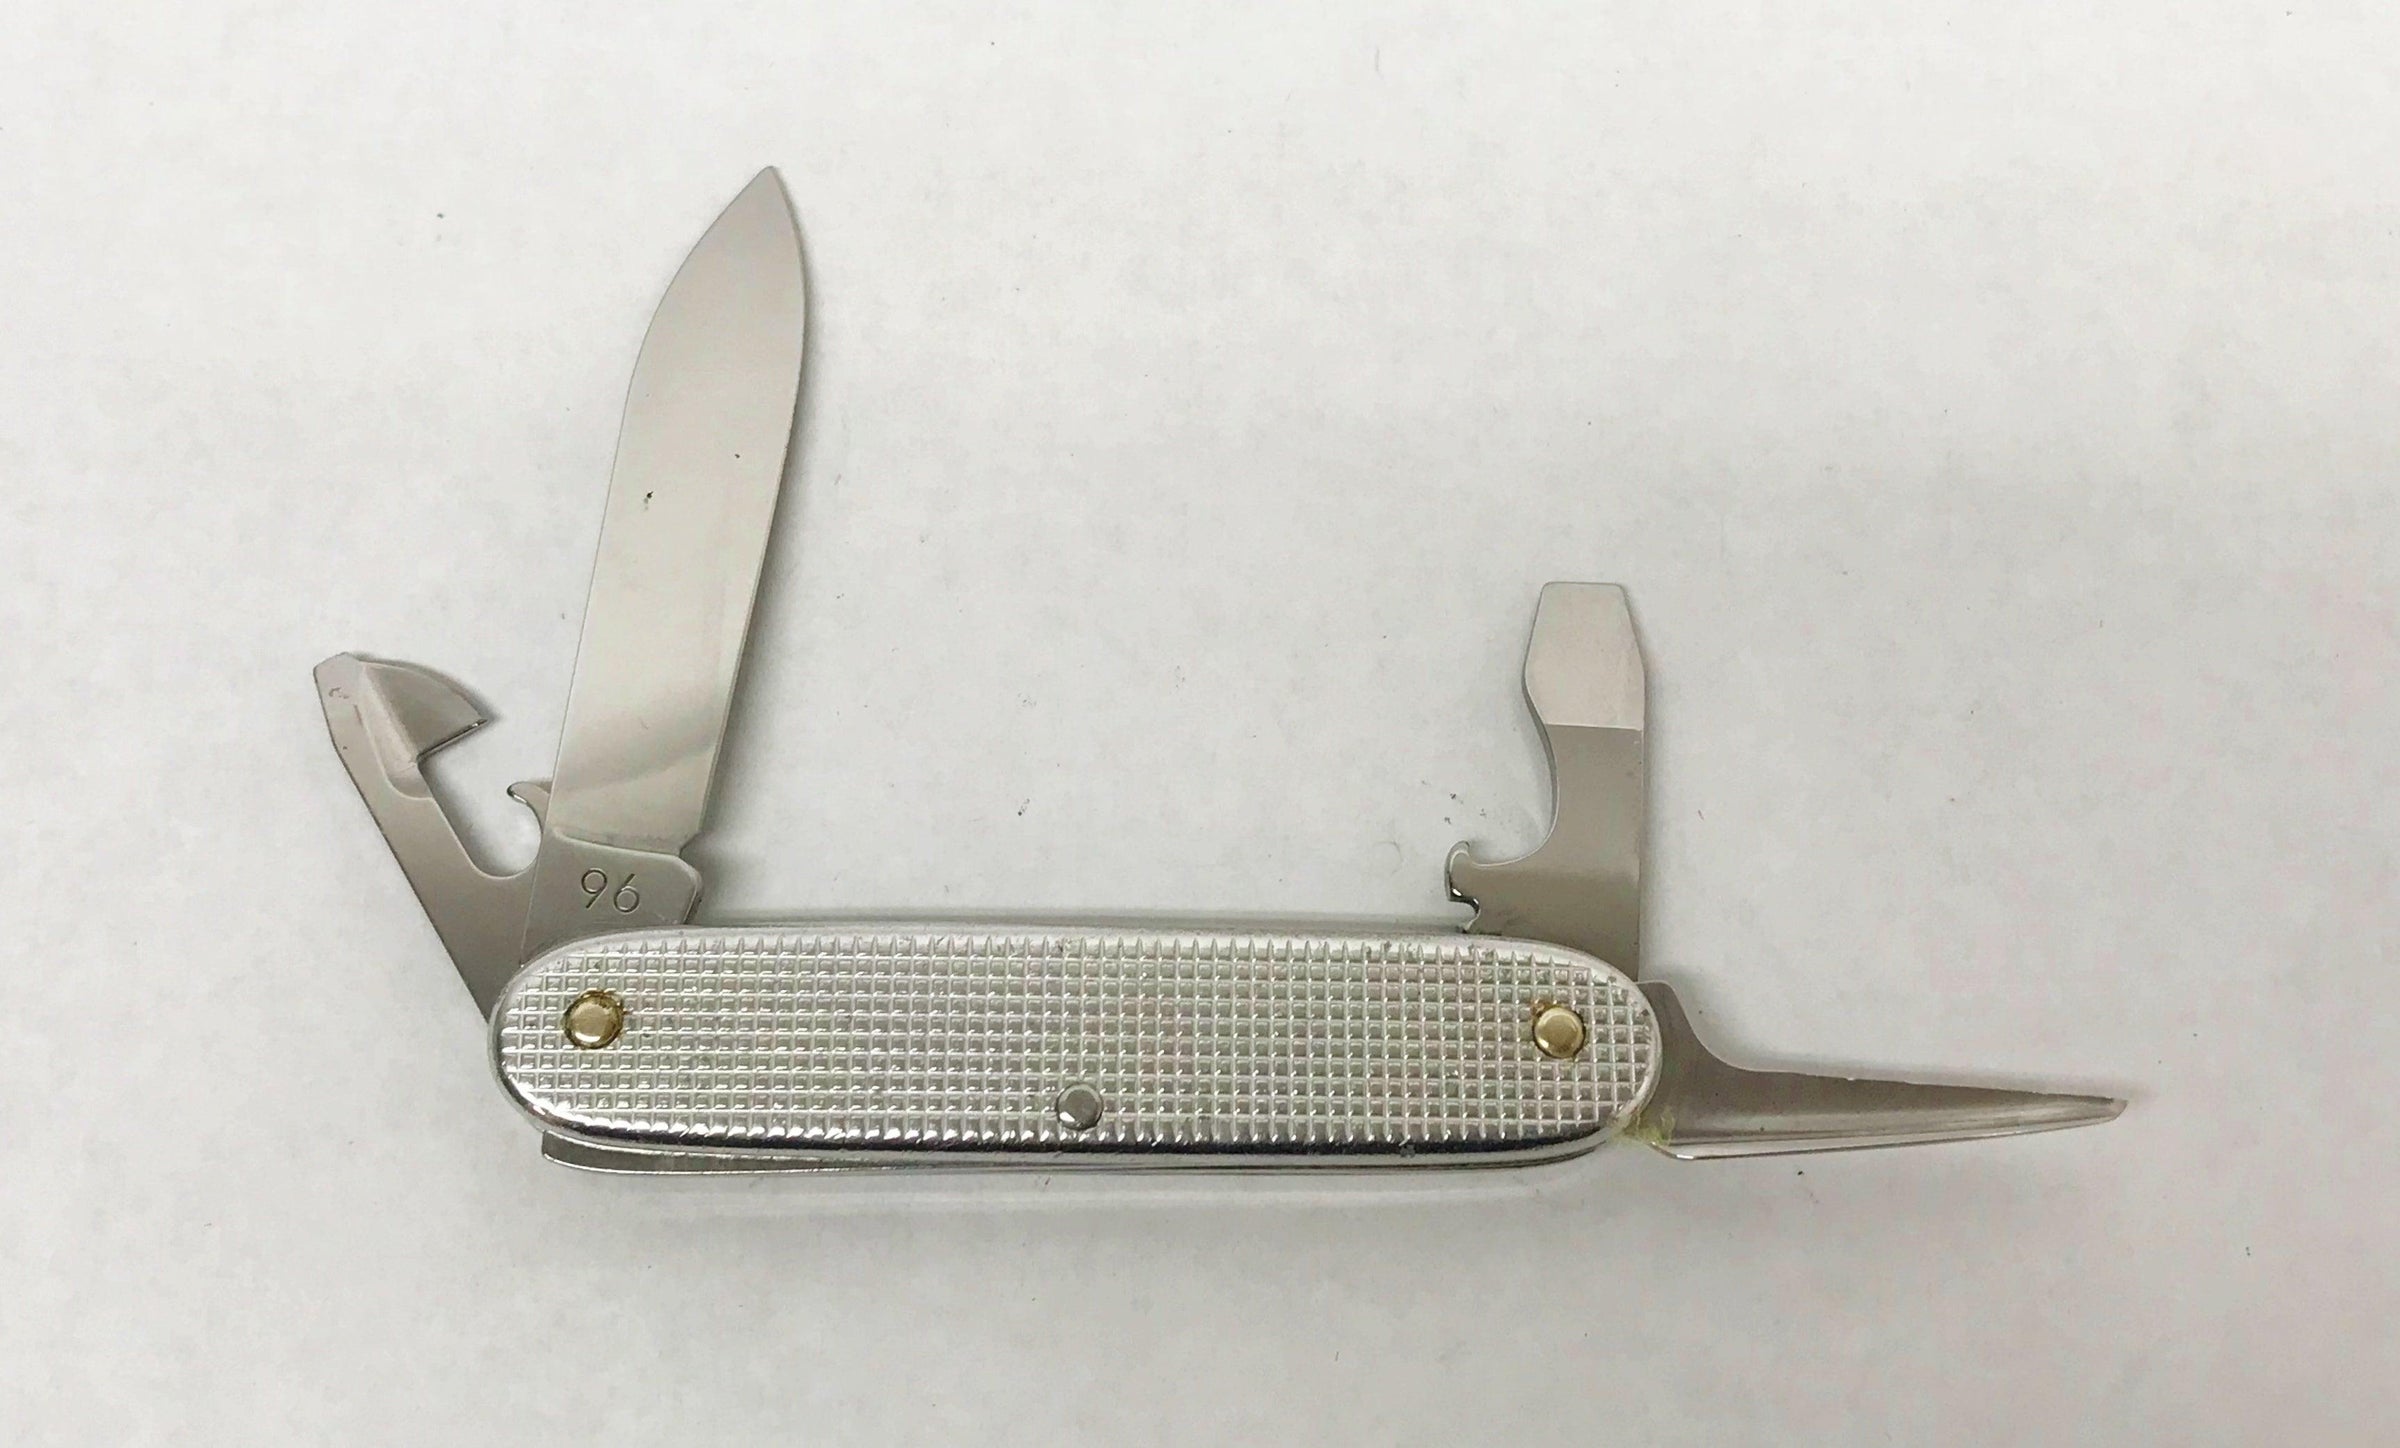 Vintage 1996 Swiss Army Victorinox Alox Soldier Pocket Knife with Box